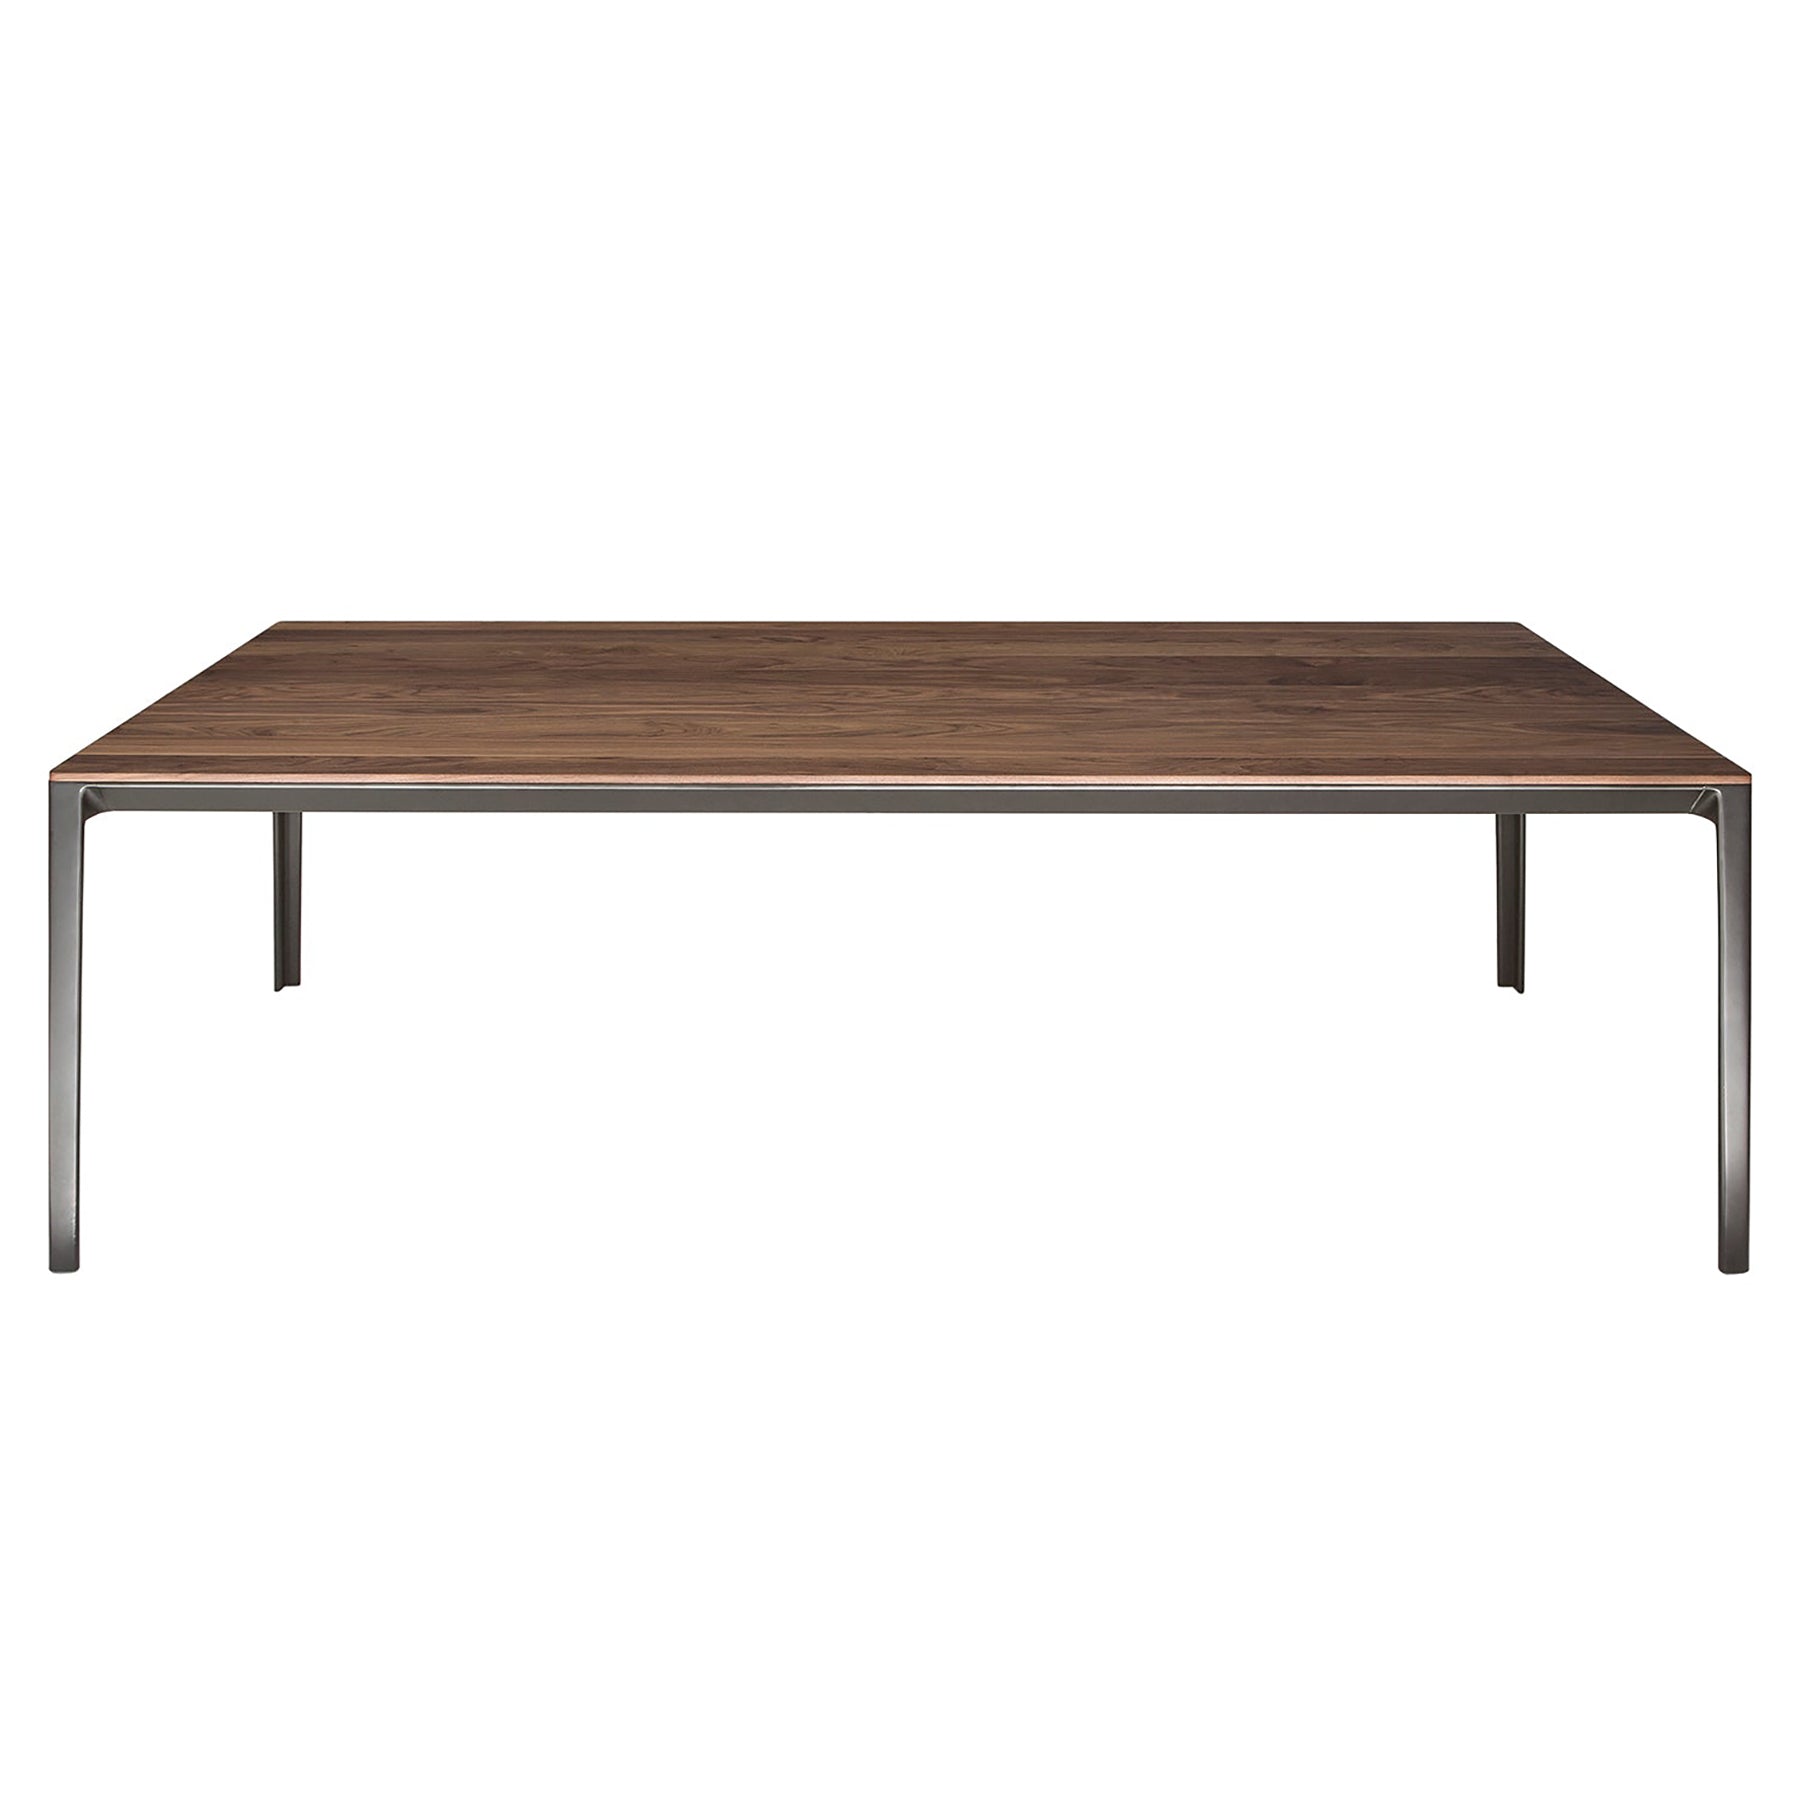 Able Dining Table: Large - 110.2